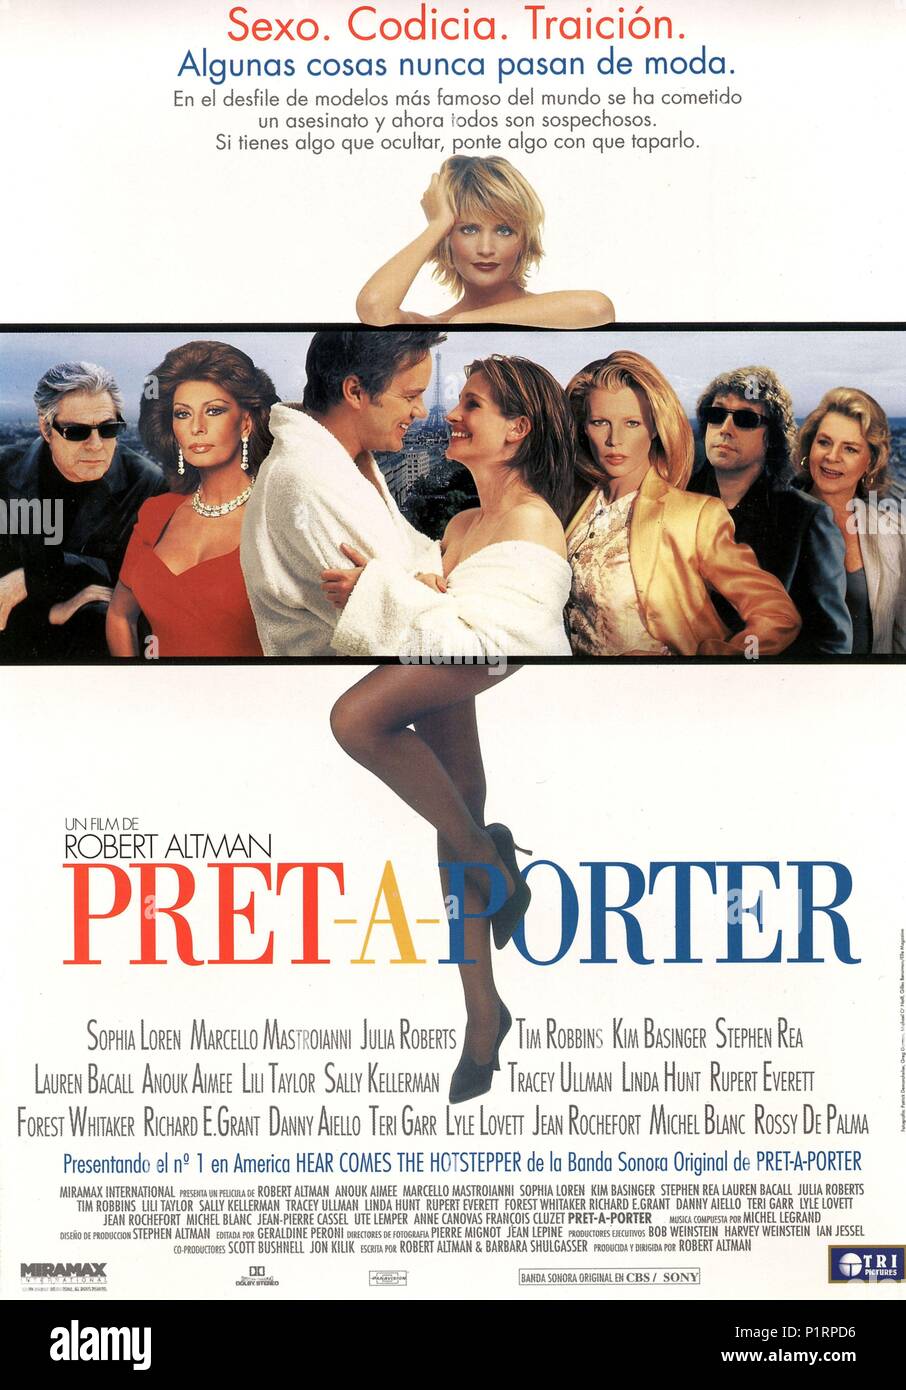 Original Film Title: PRÊT-À-PORTER. English Title: PRÊT-À-PORTER. Film  Director: ROBERT ALTMAN. Year: 1994. Copyright: Editorial inside use only.  This is a publicly distributed handout. Access rights only, no license of  copyright provided.